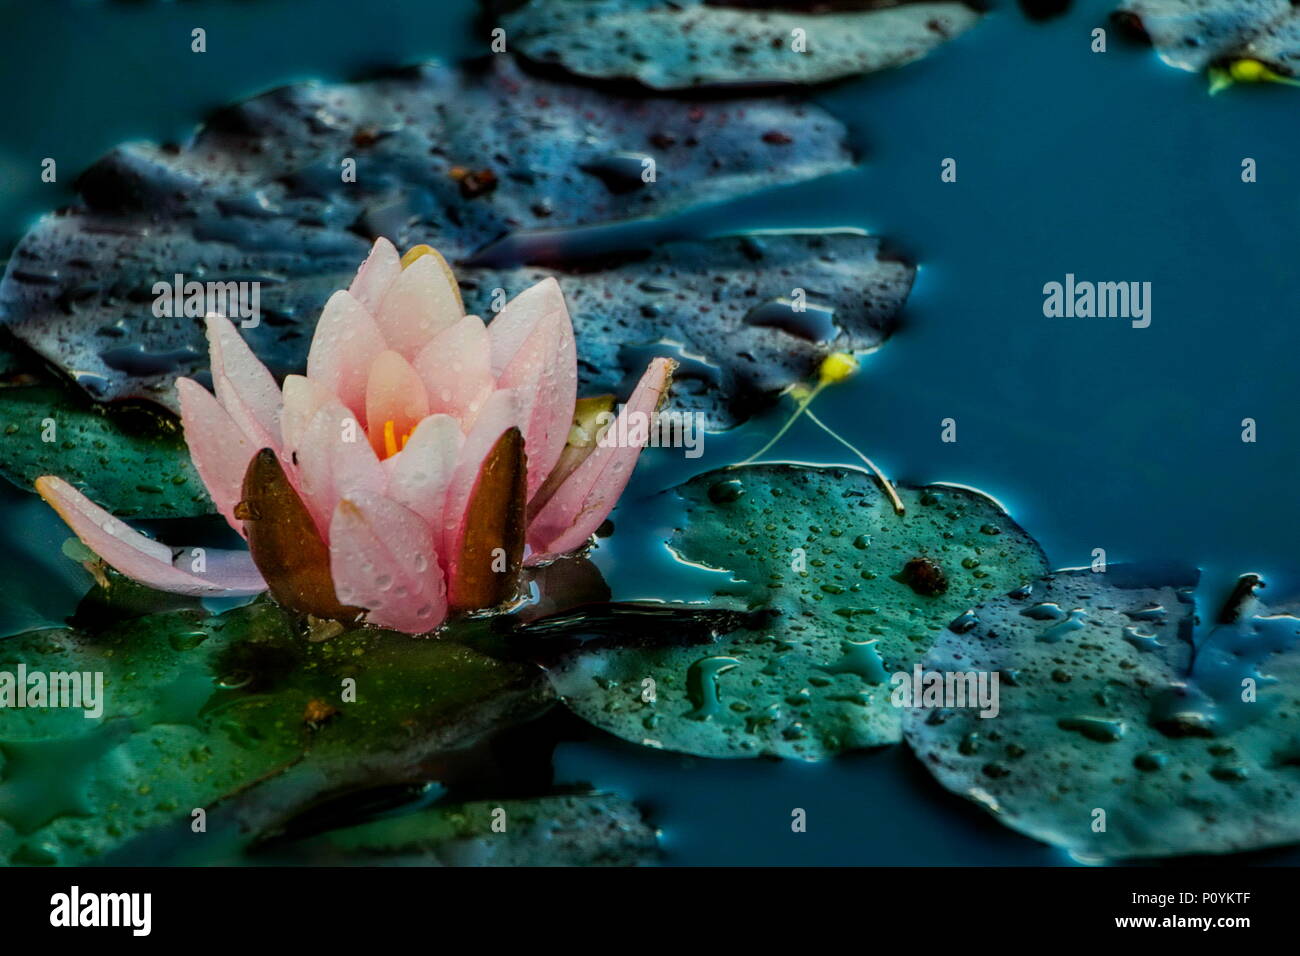 Pink water lily, know also as lotus flower of the genus Nymphaea, family Nymphaeaceae. Stock Photo